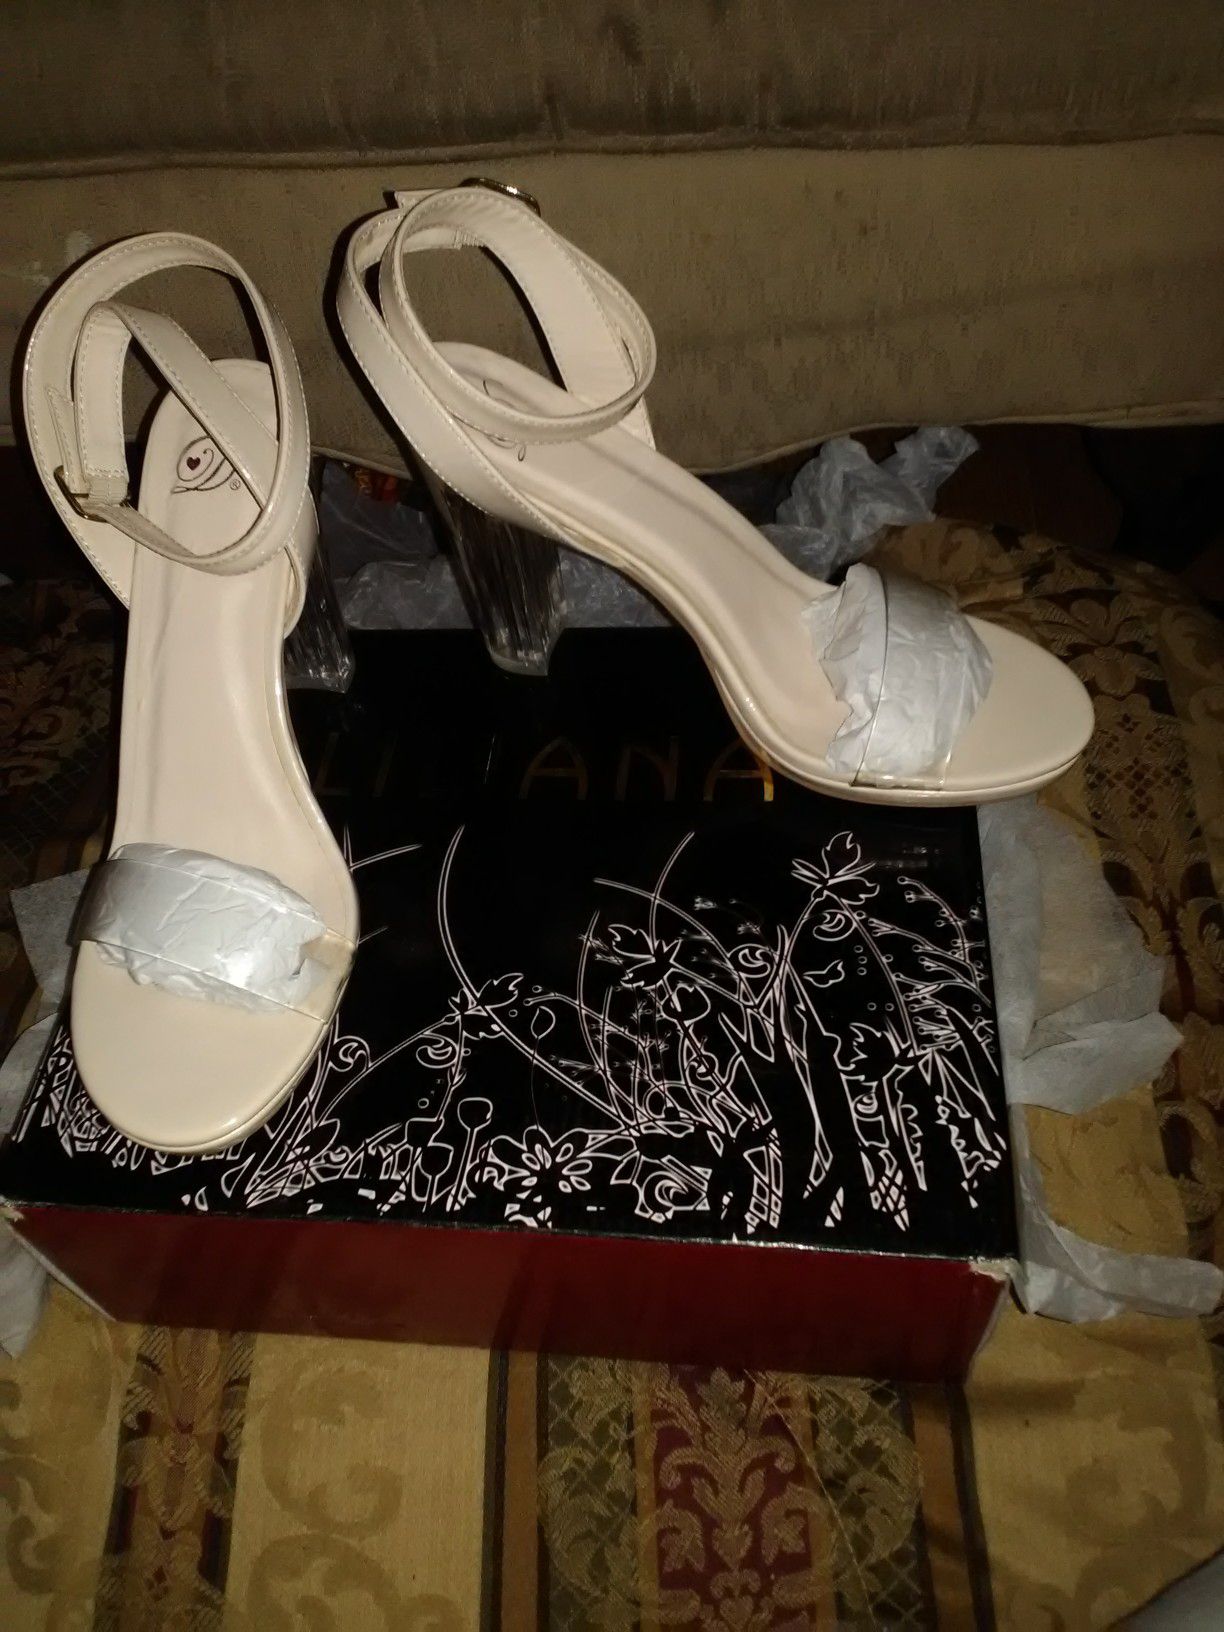 Liliana stomp the yard heels color nude size 11 brand new never been used still in box $15 or best offer